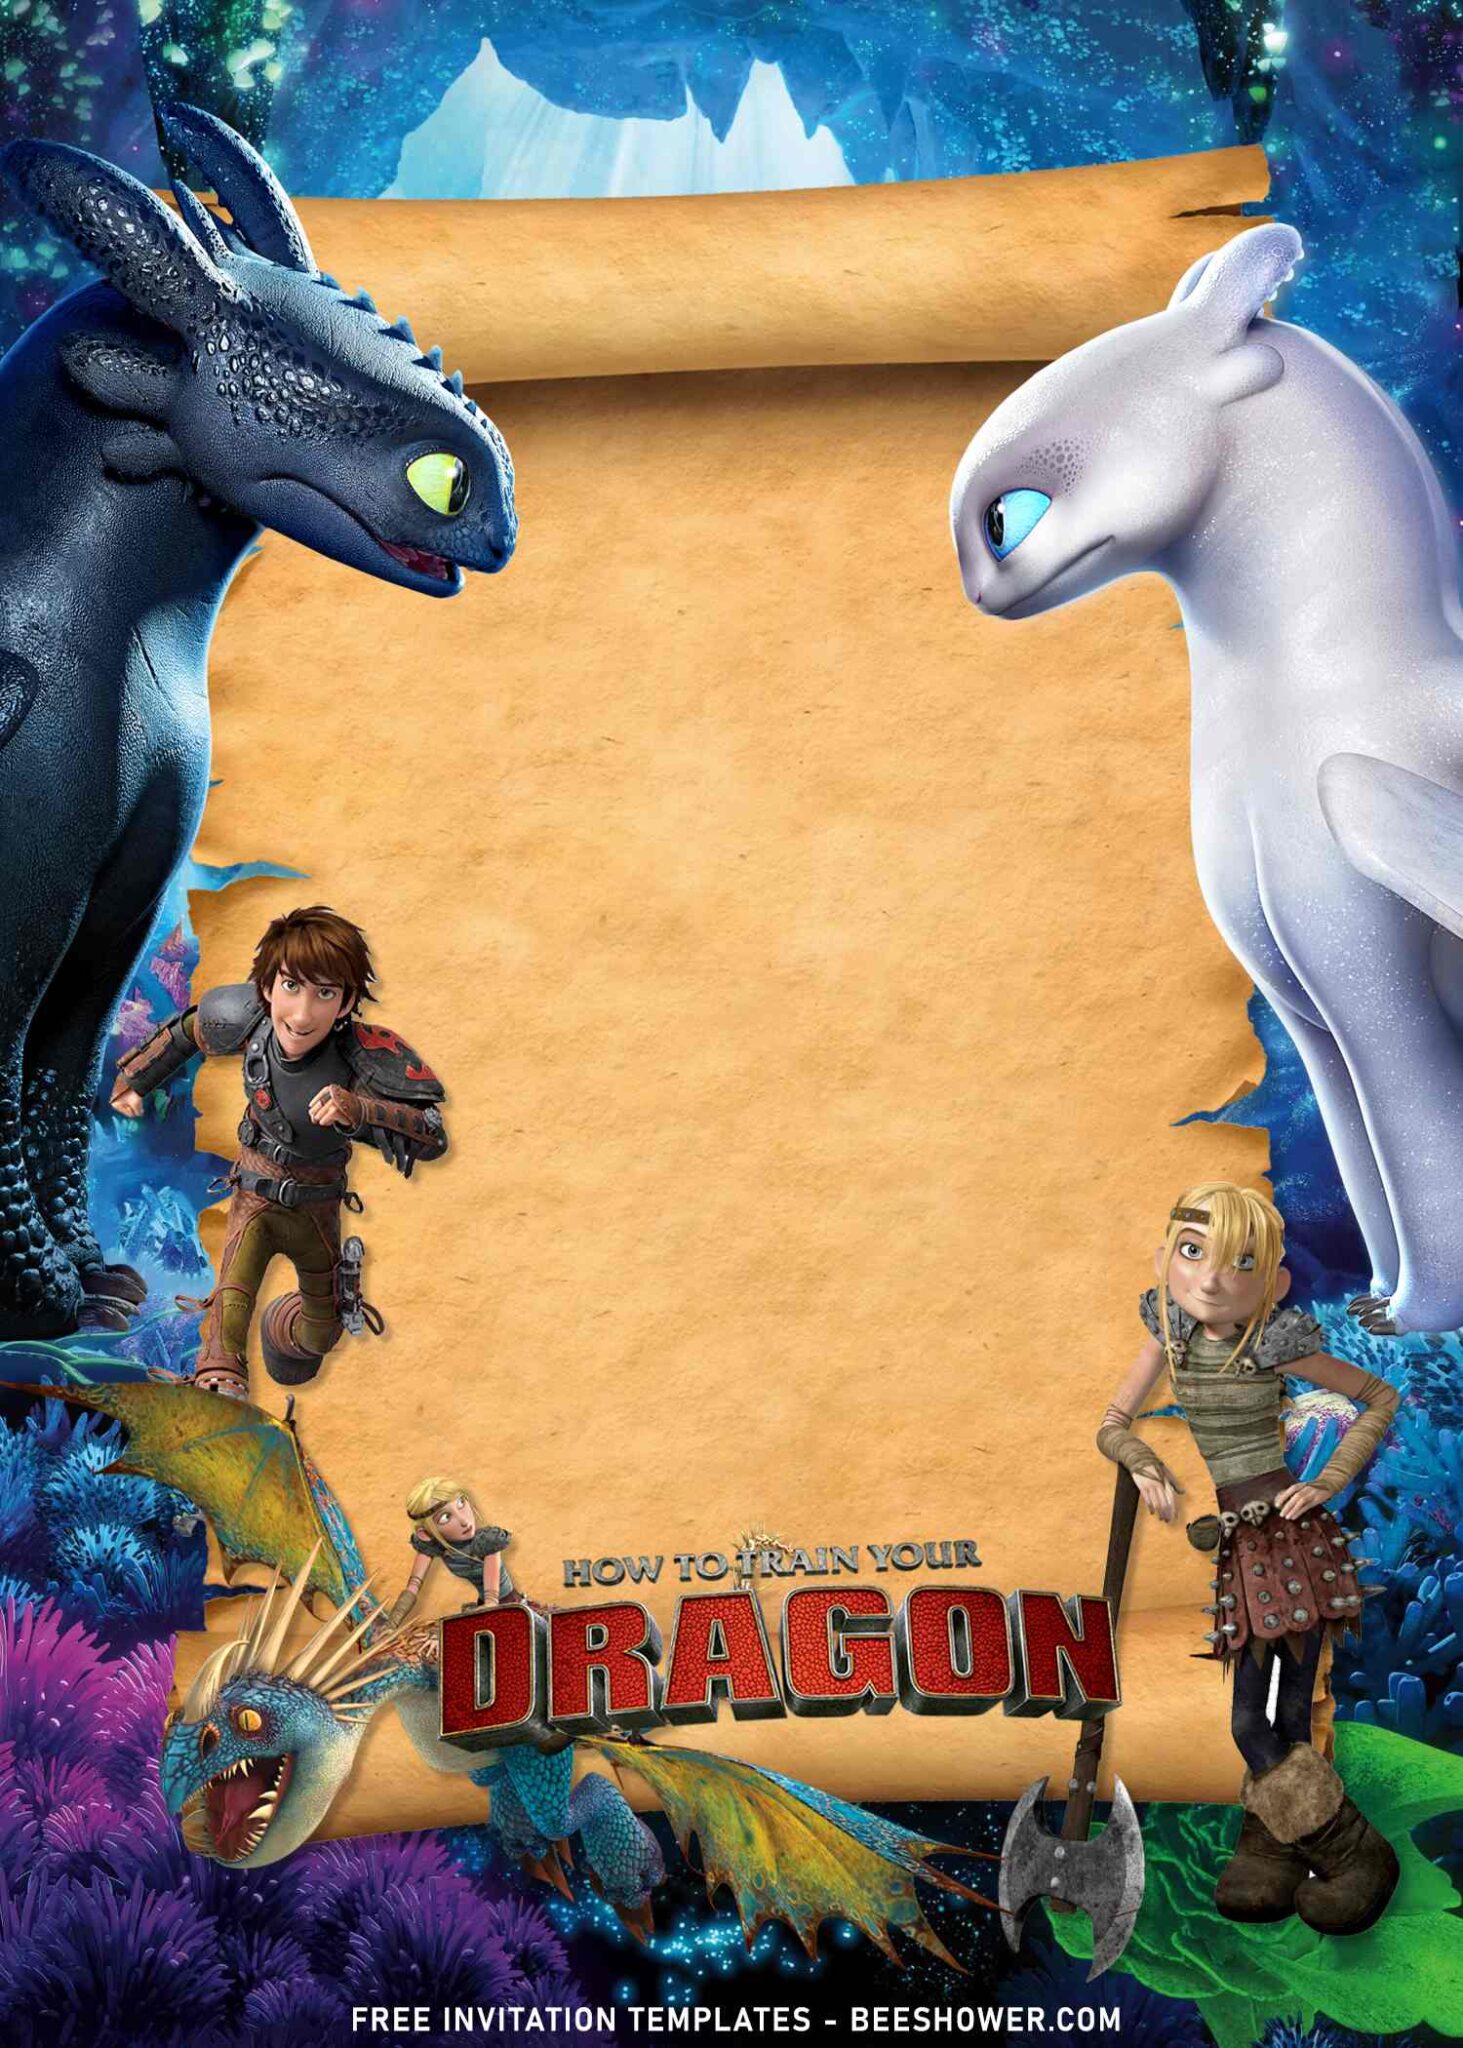 download-8-how-to-train-your-dragon-birthday-invitation-templates